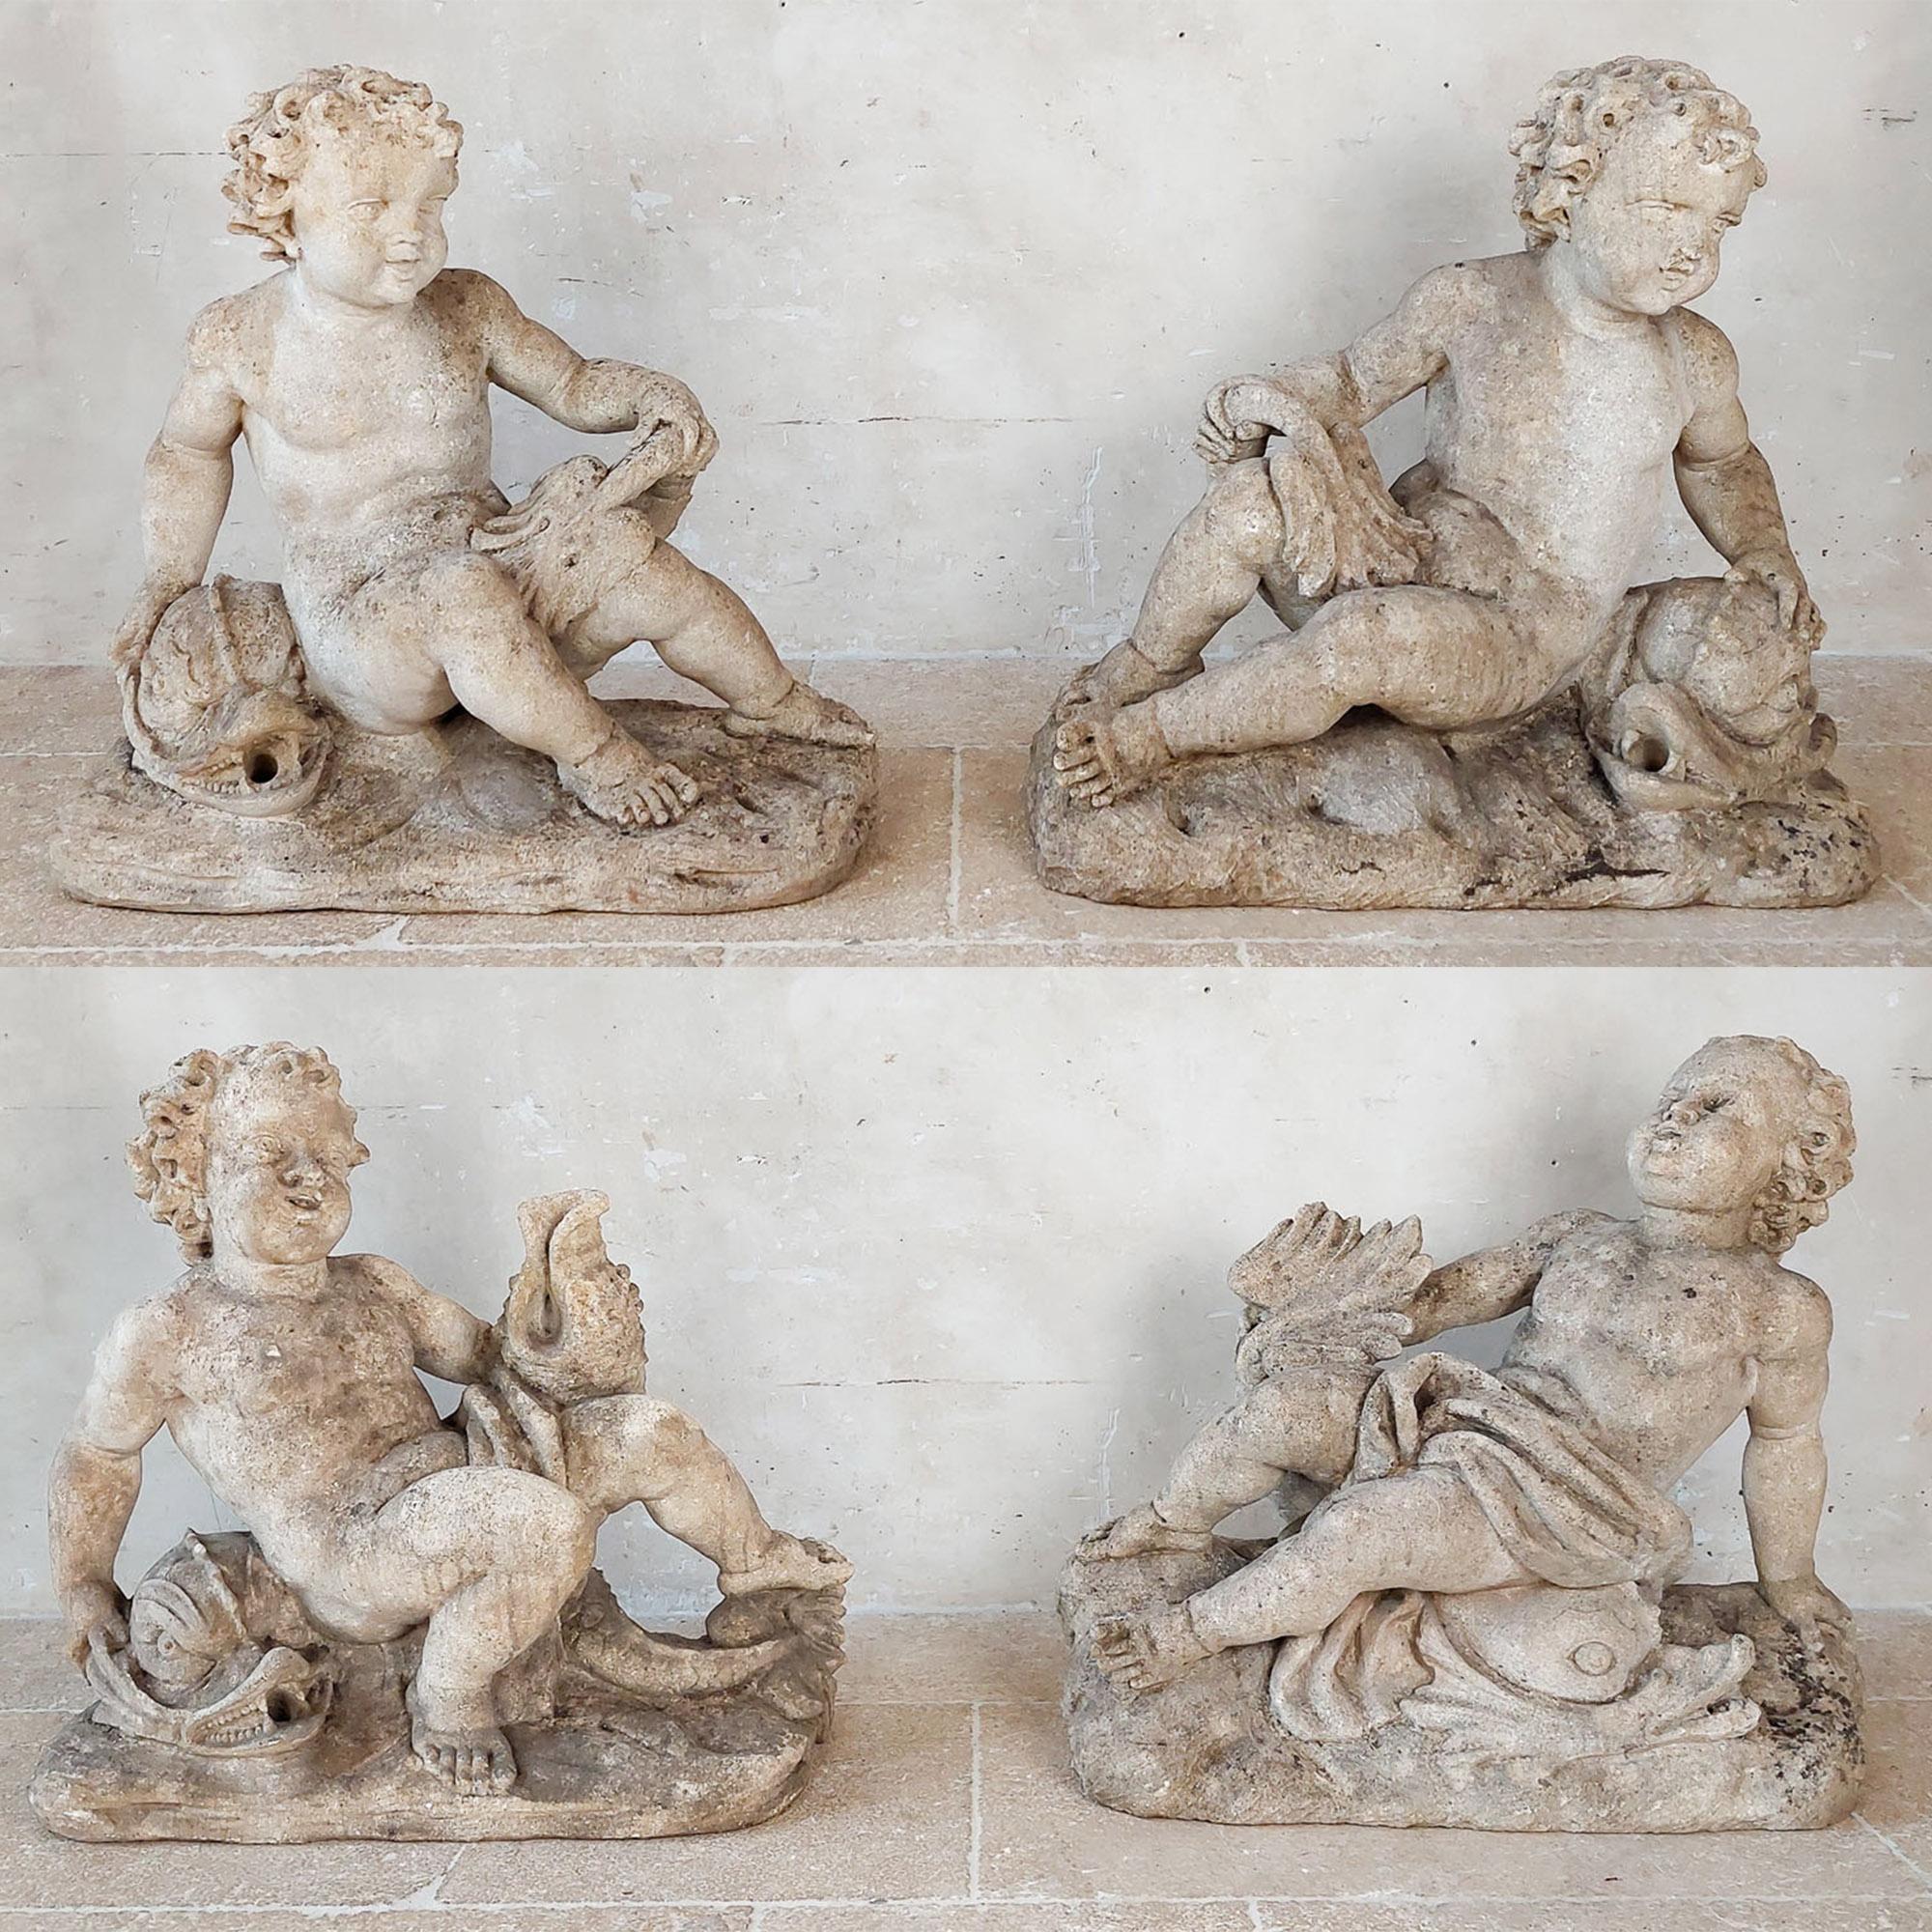 Set of 4 carved limestone fountain putti seated with dolphins, the dolphins with a small hole to be used as spouts. These sculptures are also usable as decorative objects indoors isntead of in your garden or perhaps around an indoor pool.

the